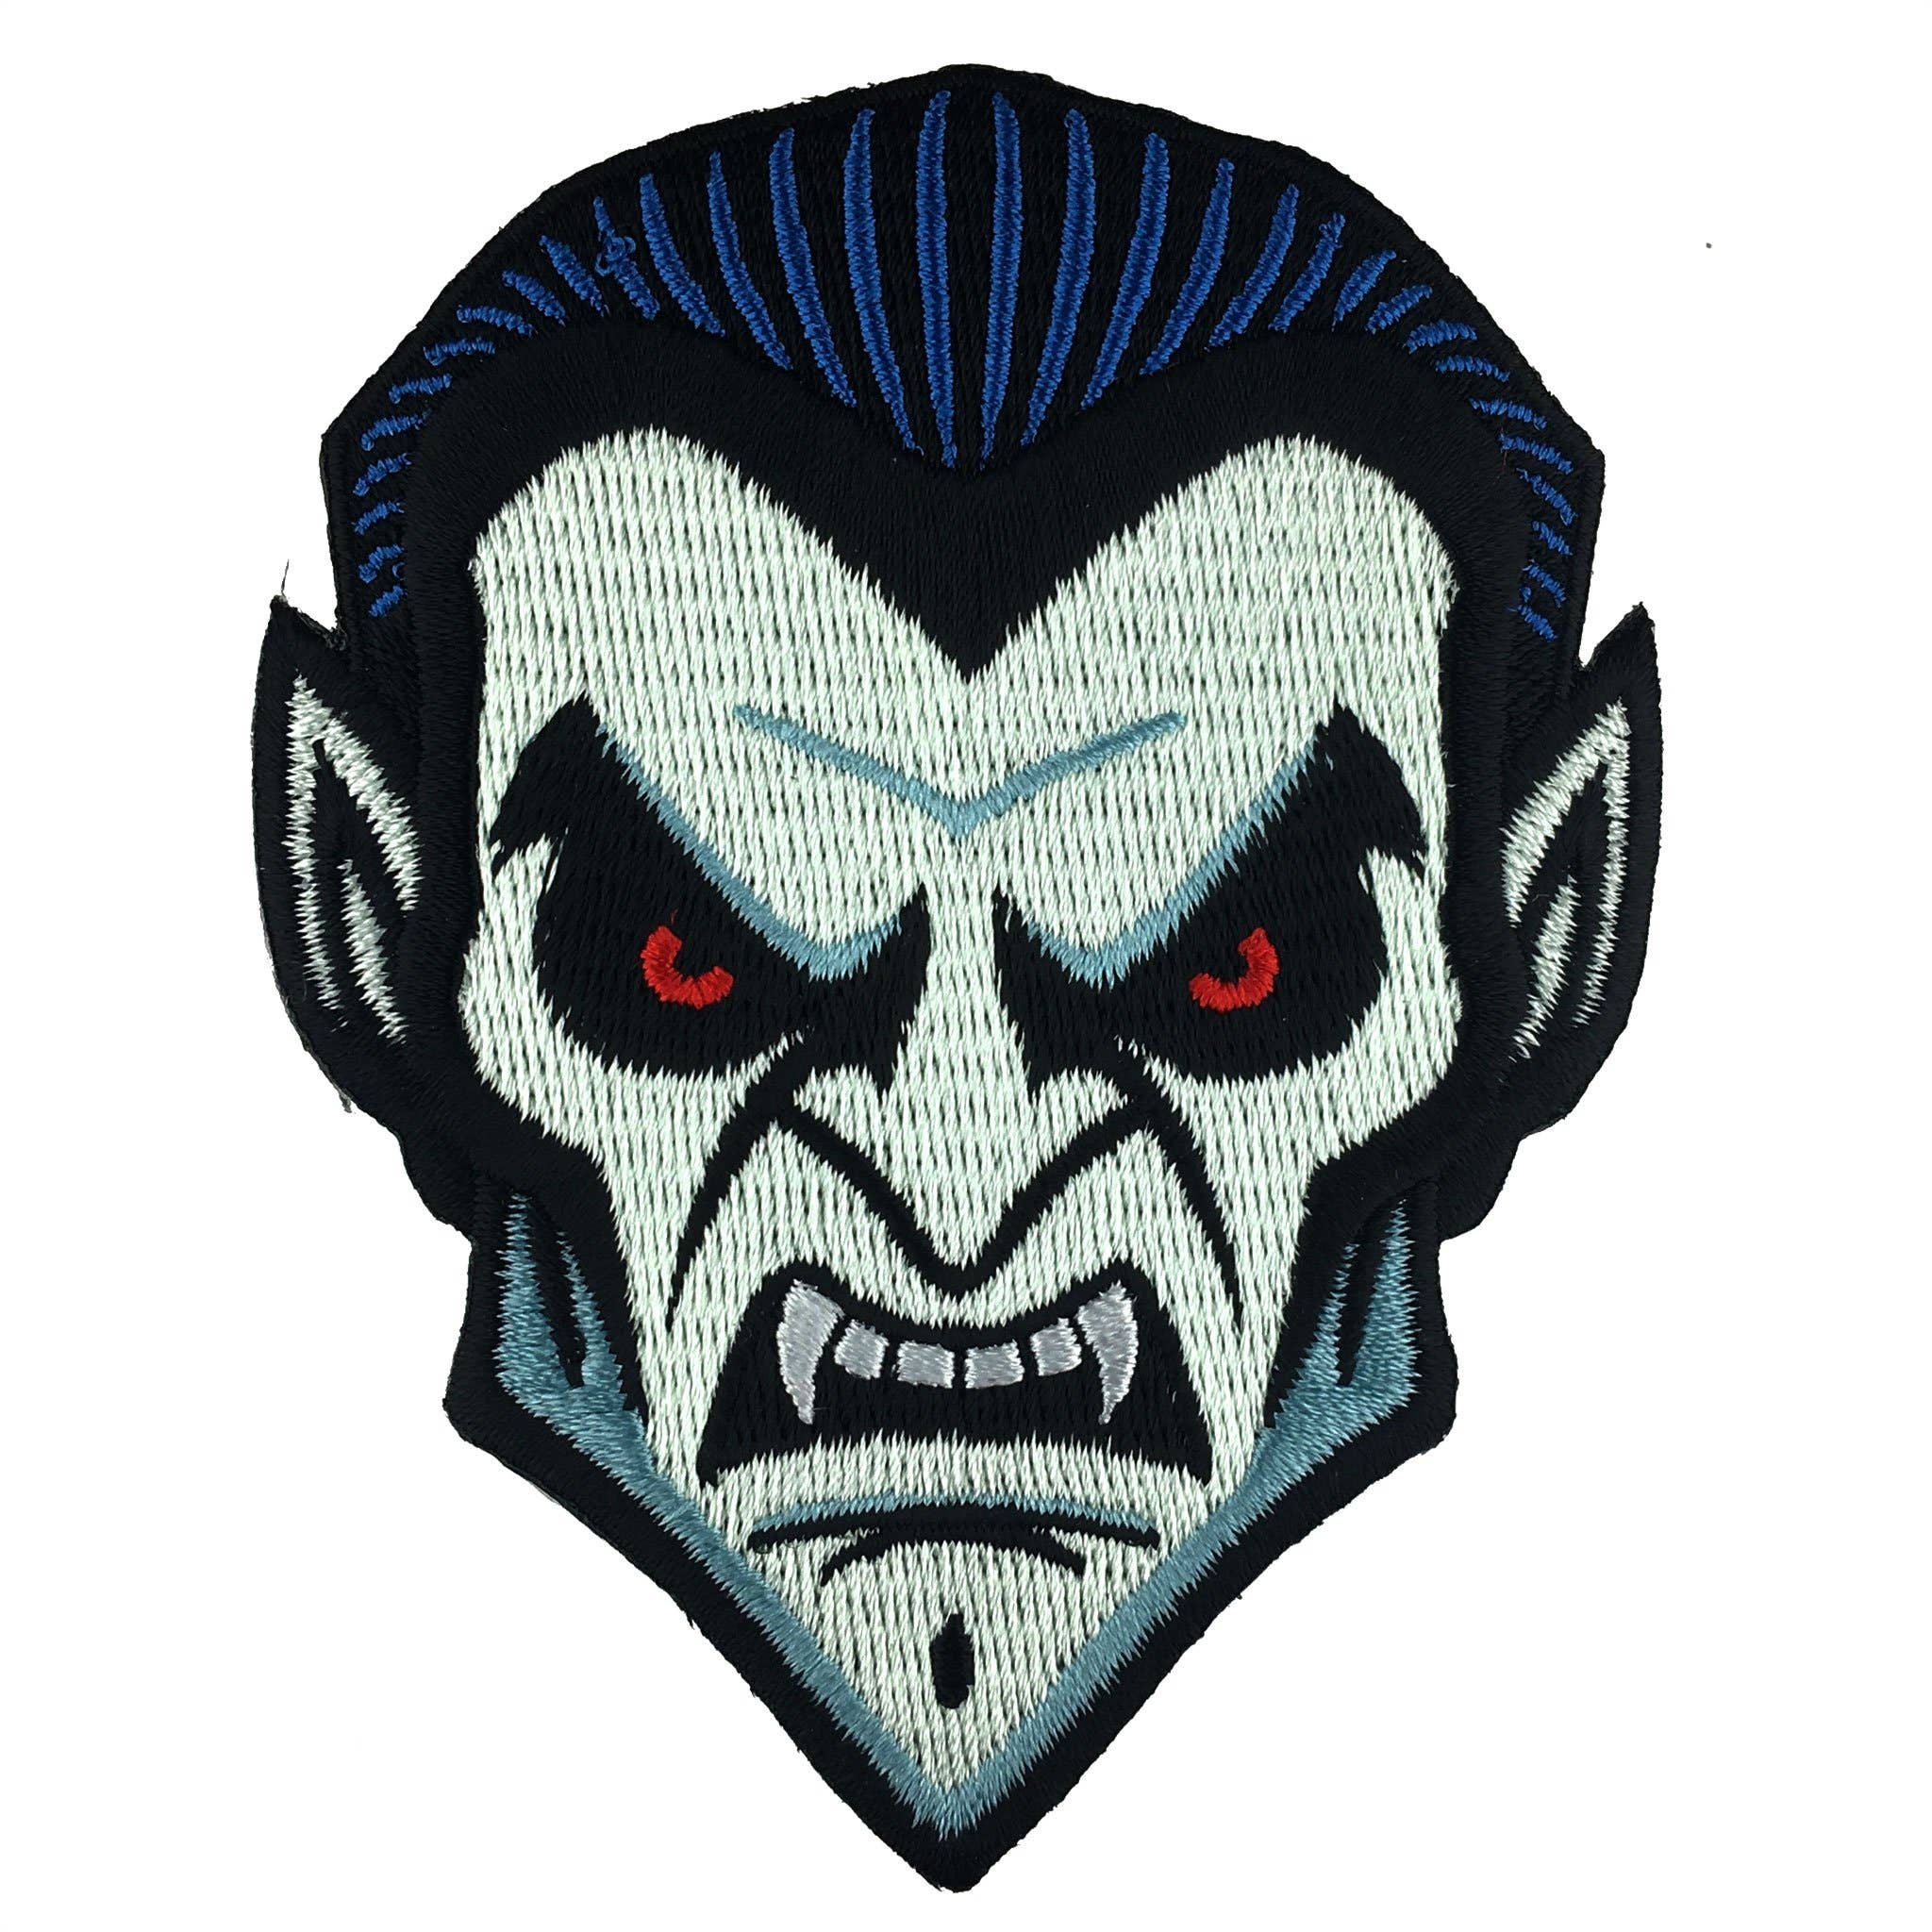 Dracula head embroidered patch